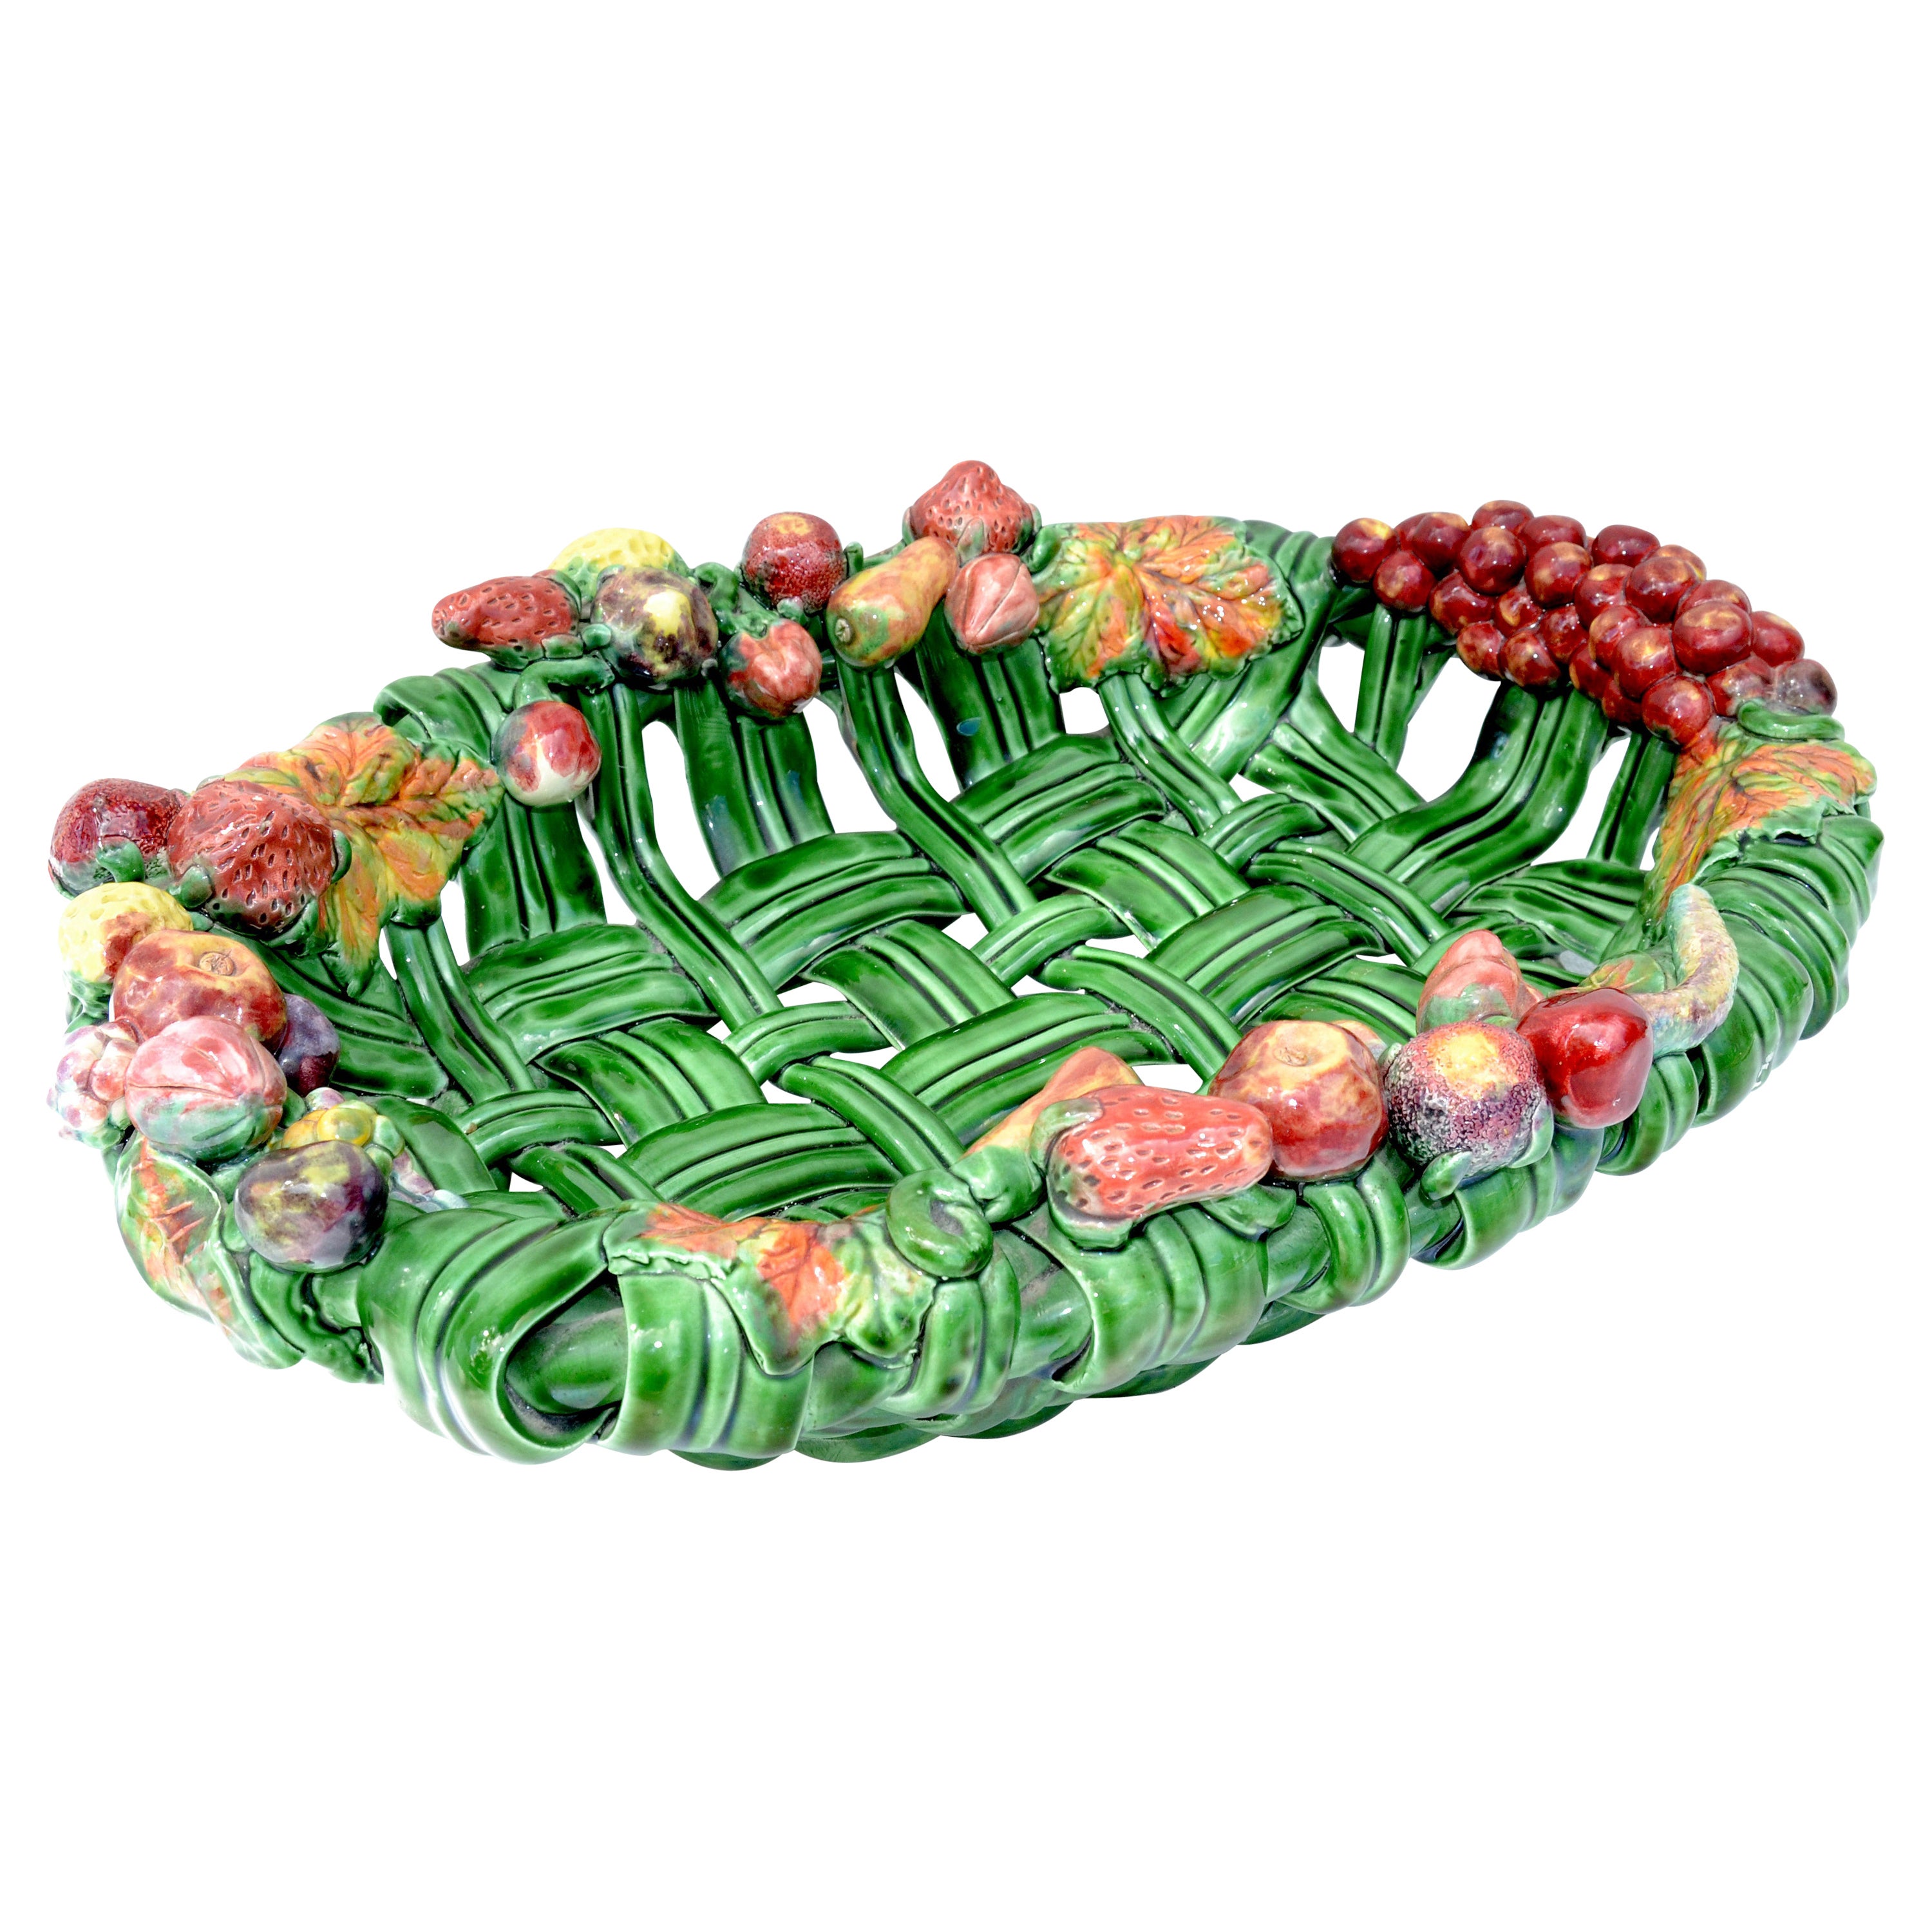 Vallauris France Glazed Woven Ceramic Basket Pink & Green Strawberry Pottery 70